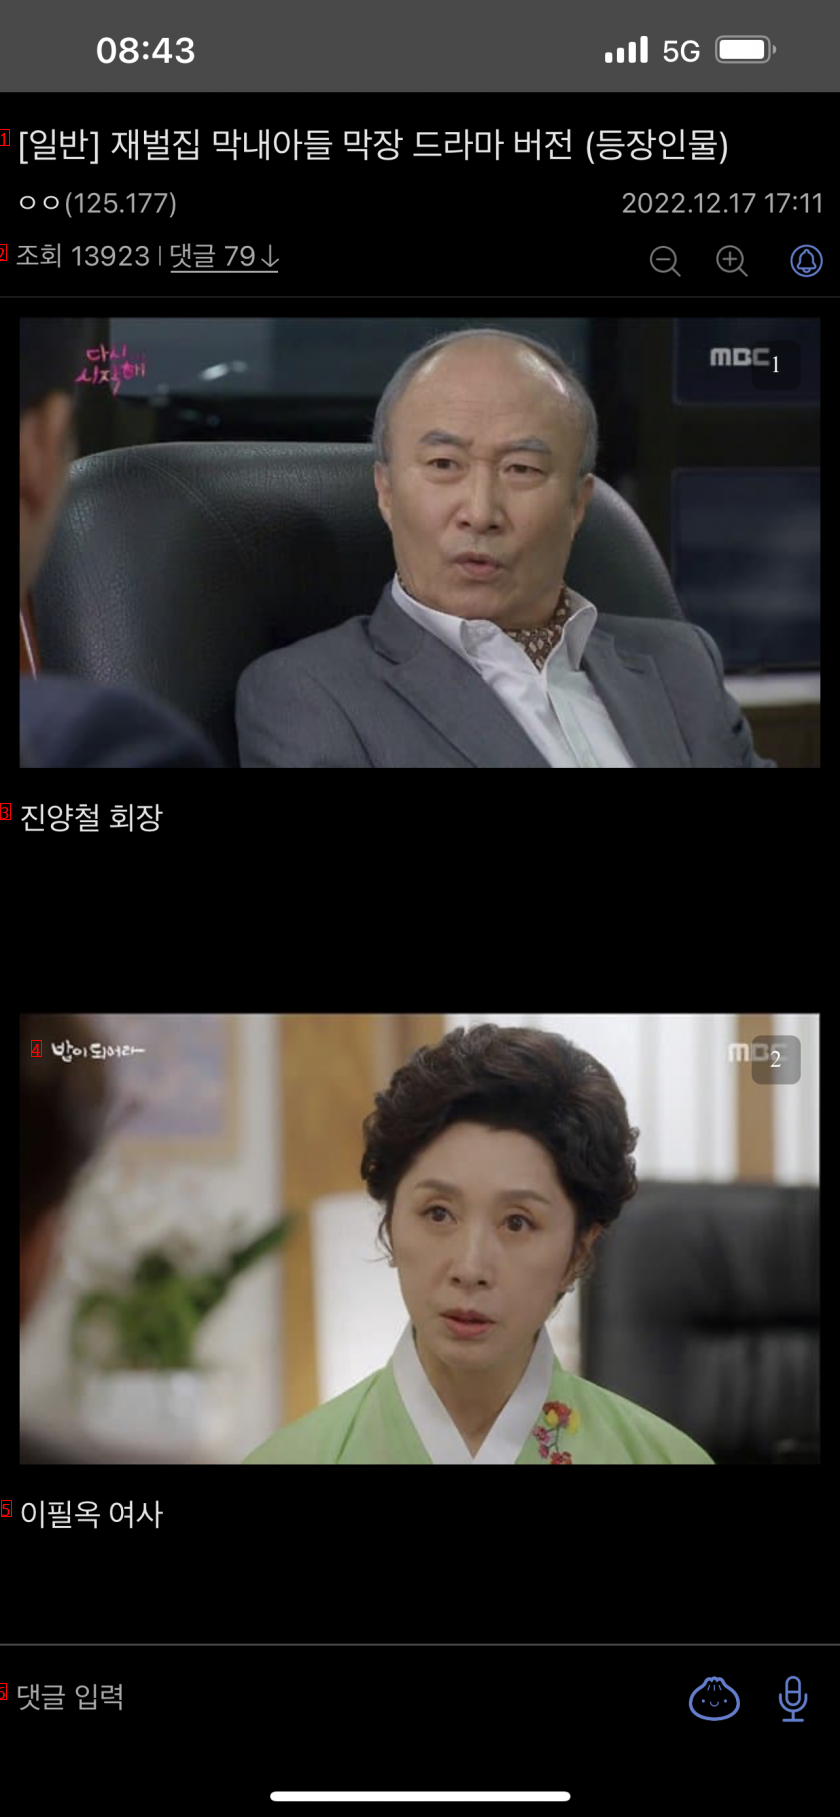 The youngest son of a chaebol family. A crazy drama version